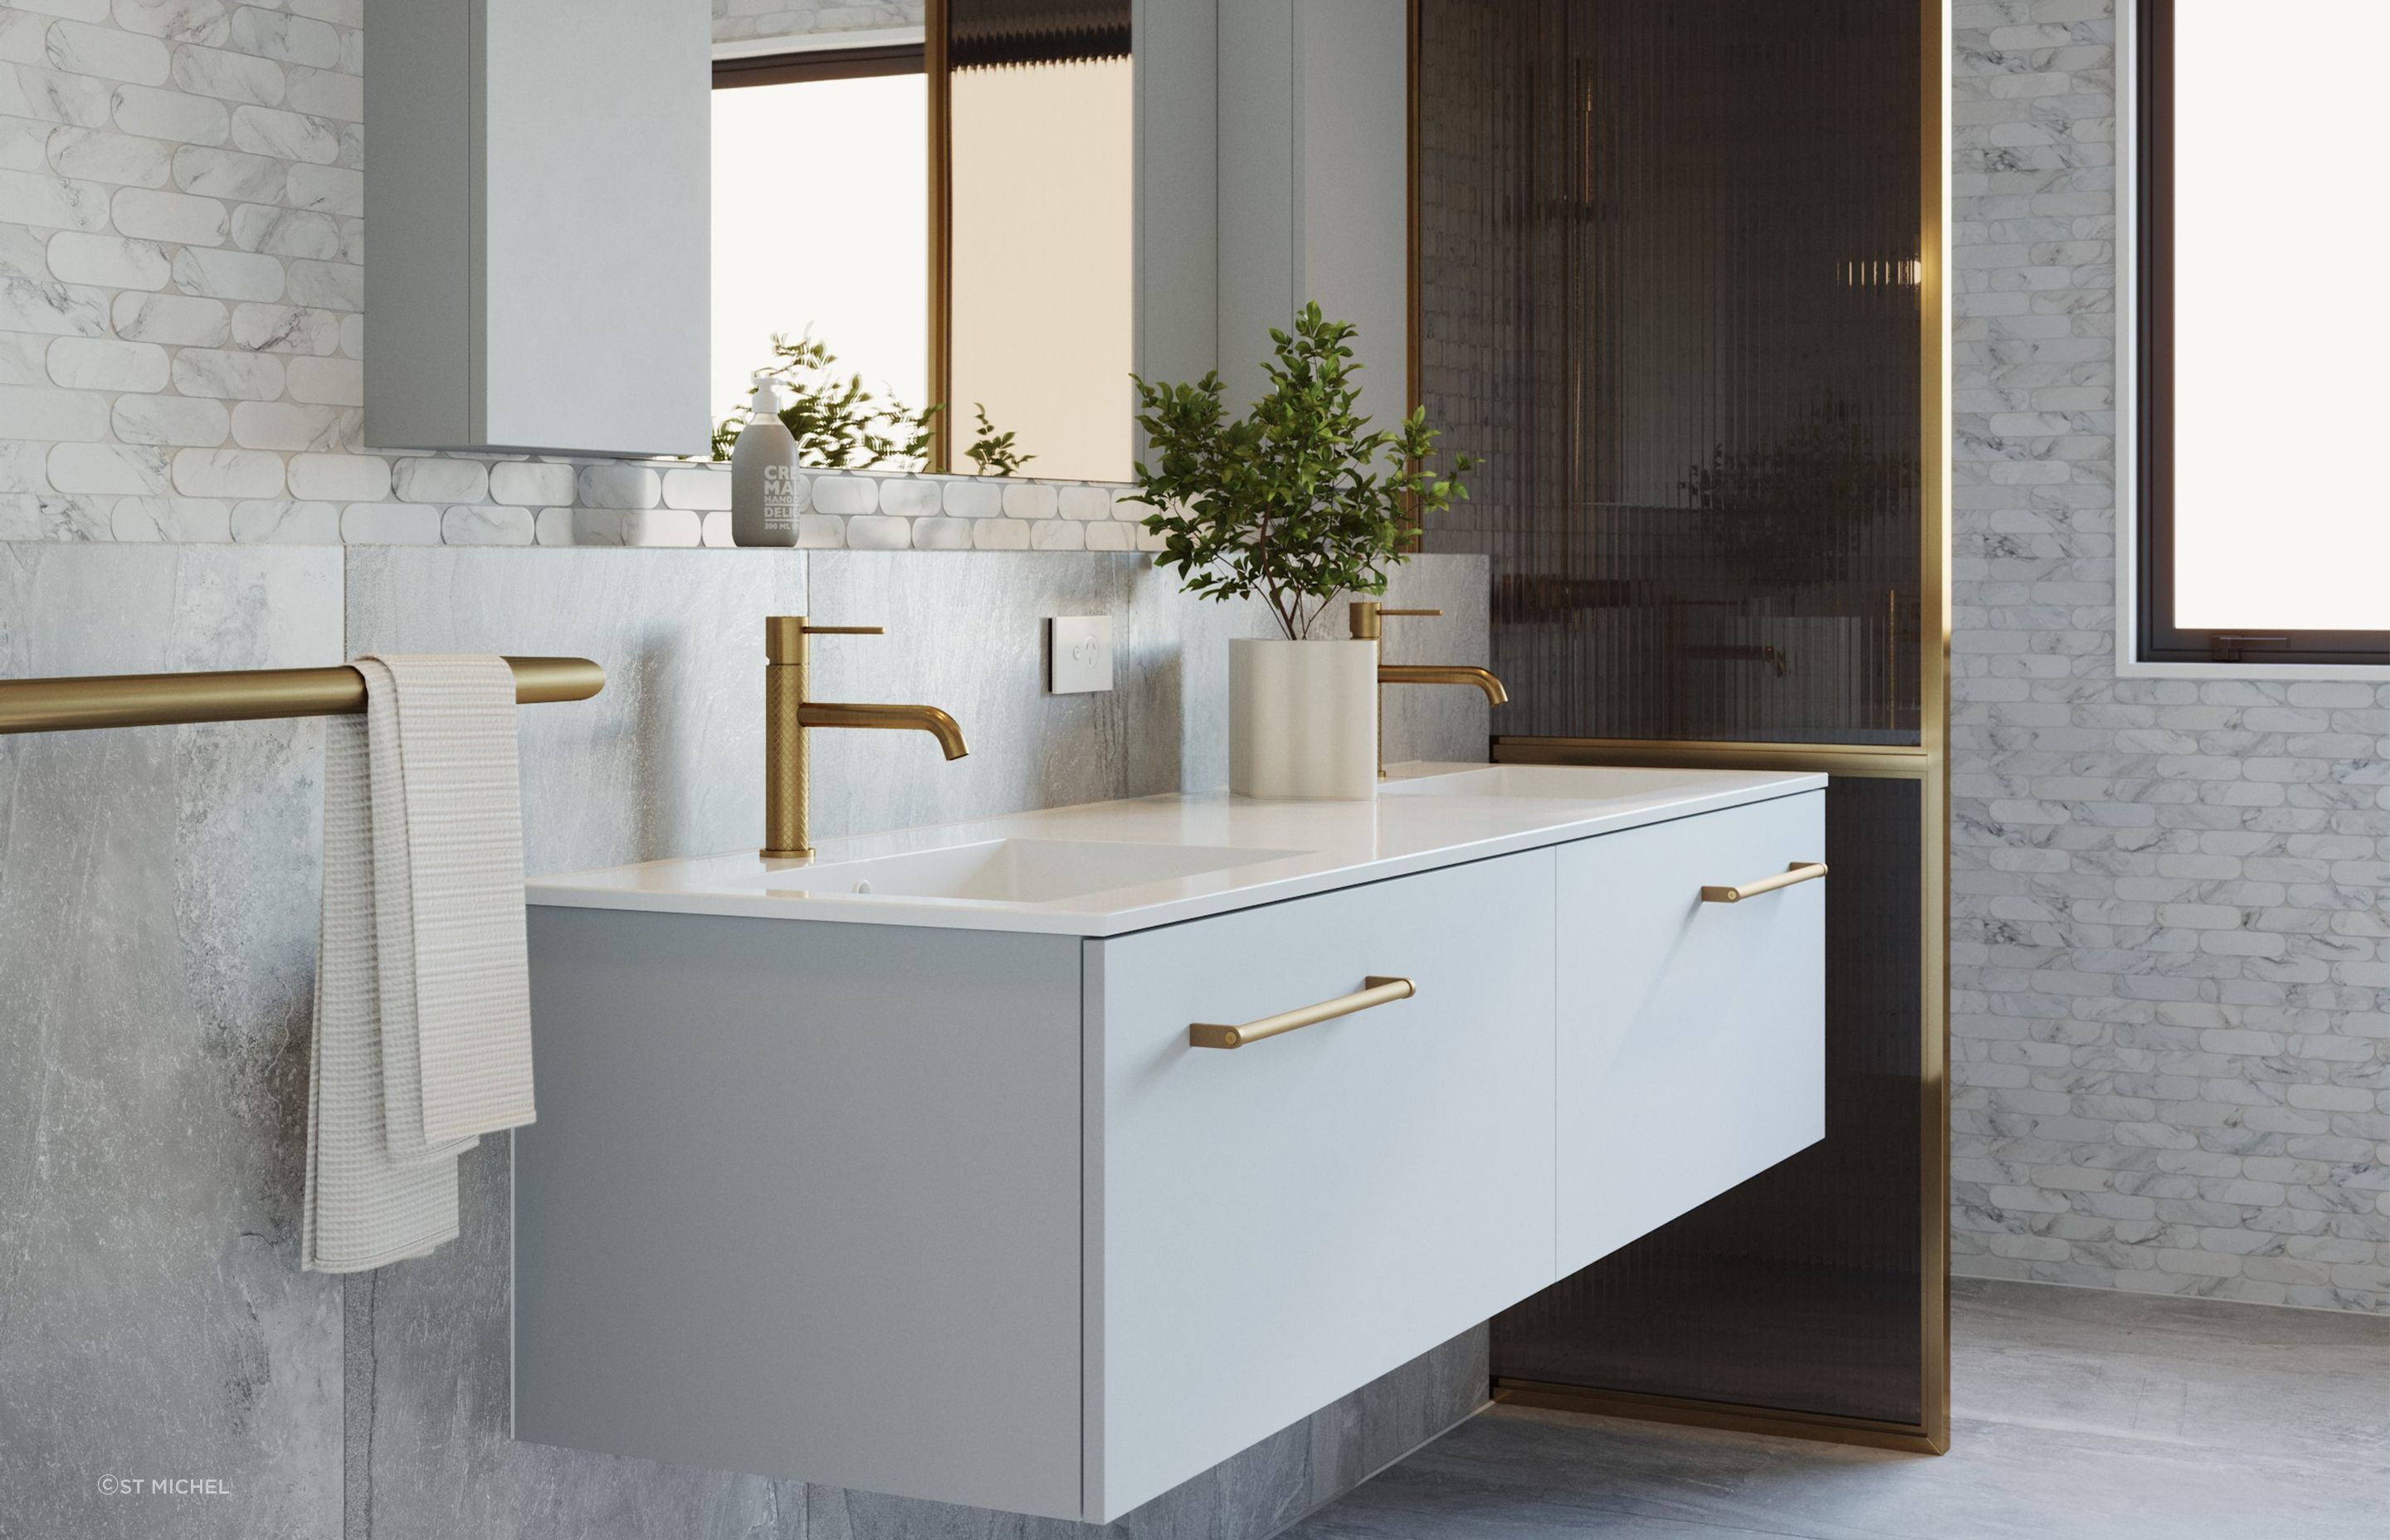 The sky's the limit when it comes to bathroom vanity ideas especially with great options like the Ivy 50 Vanity with Console which has 20 different cabinet finishes to consider.